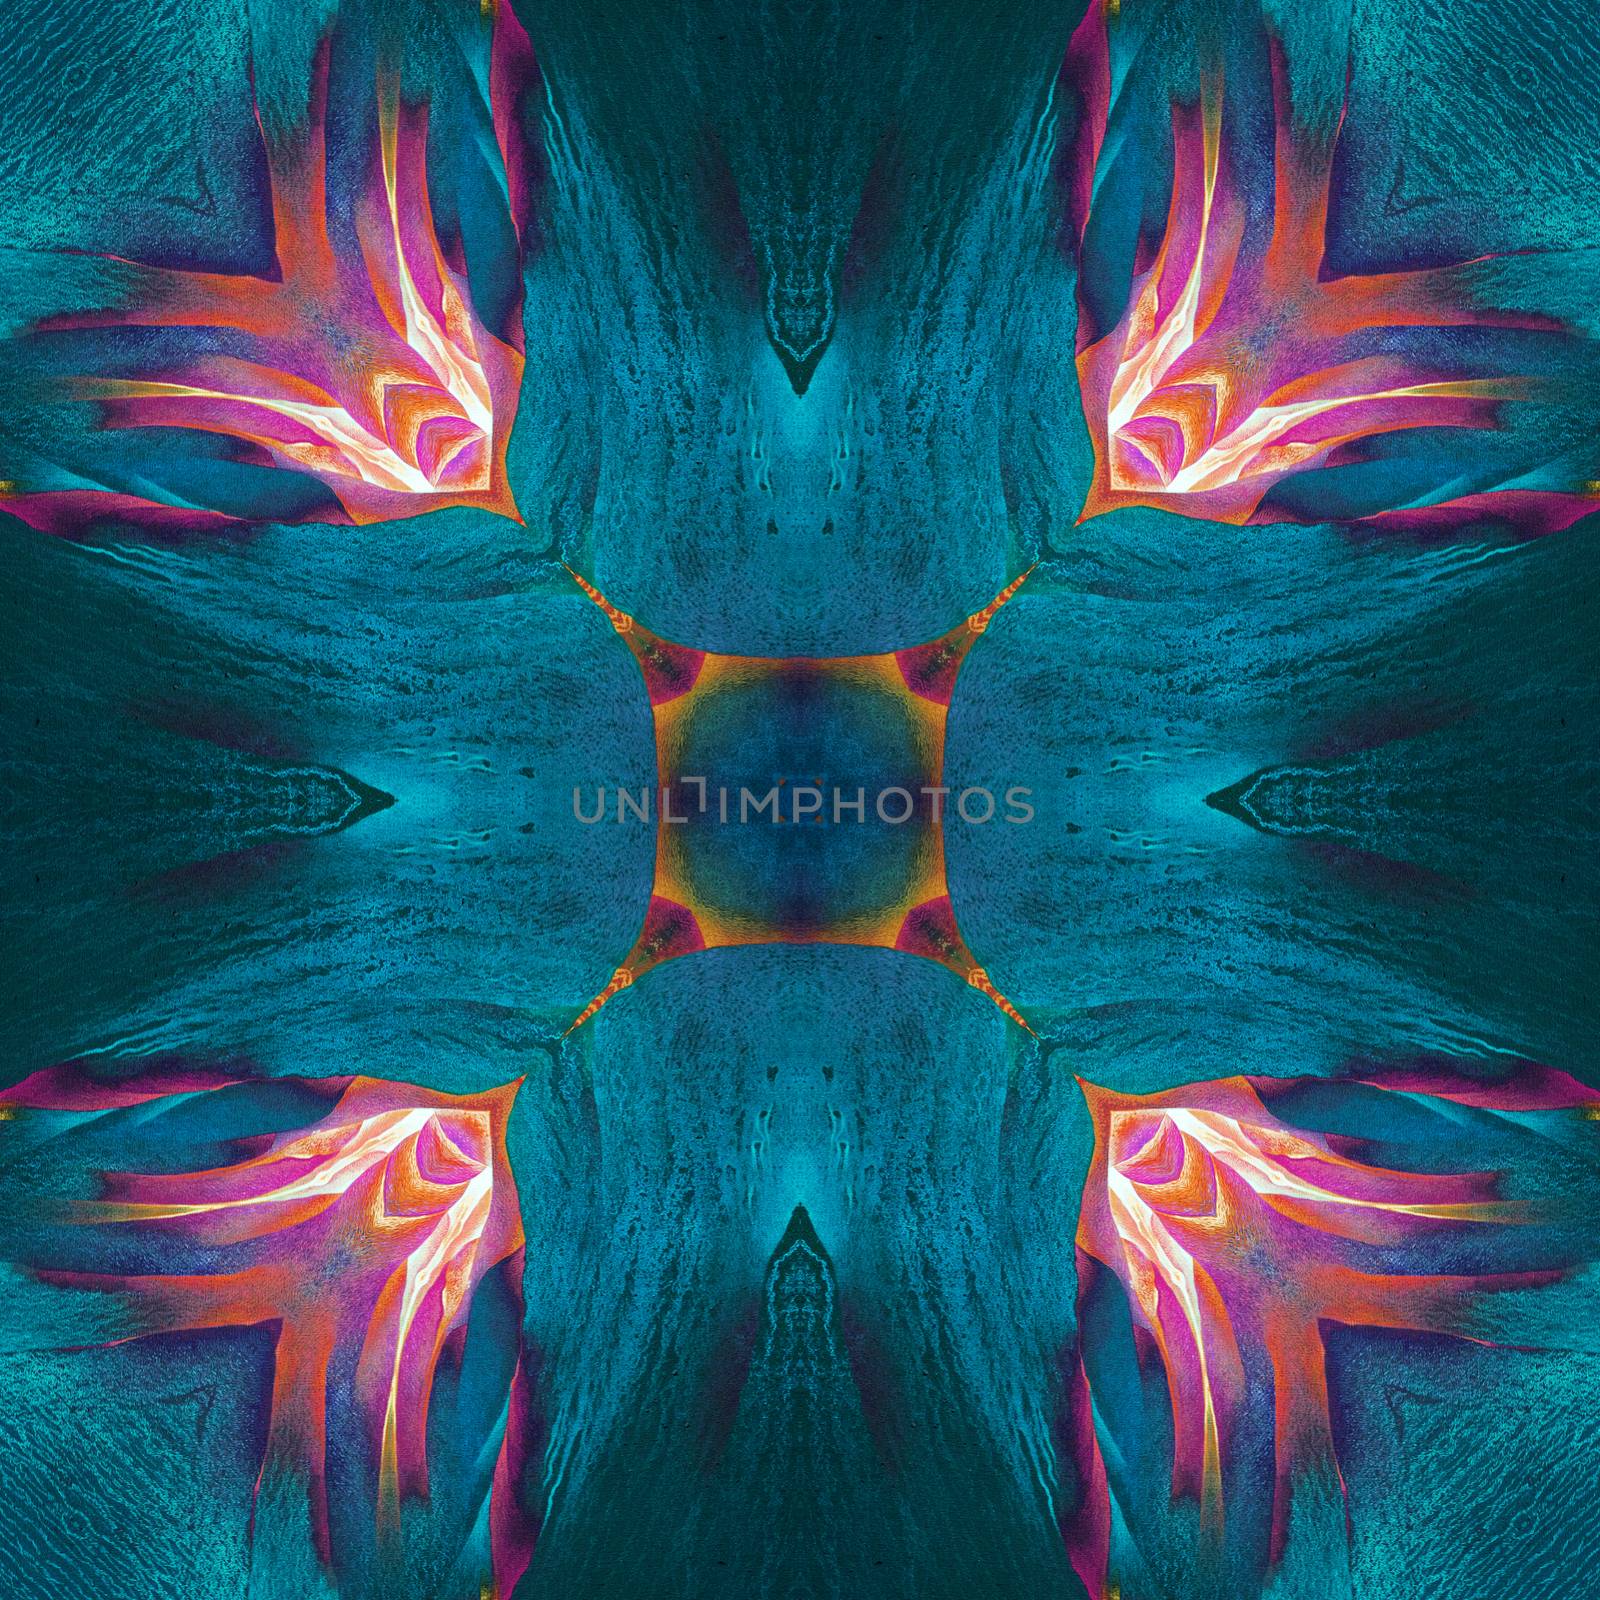 Abstract kaleidoscope or endless pattern. by NuwatPhoto